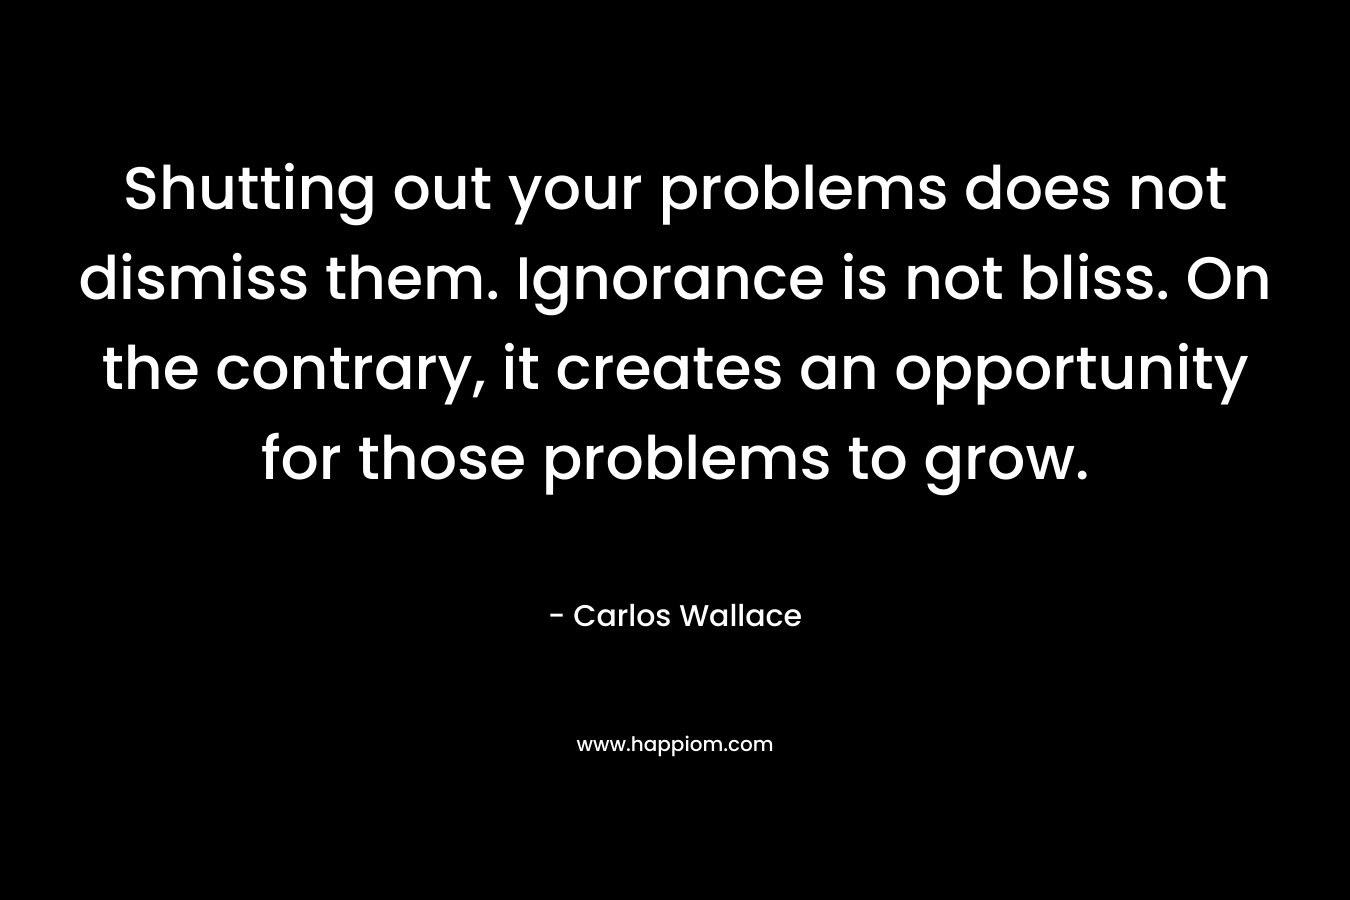 Shutting out your problems does not dismiss them. Ignorance is not bliss. On the contrary, it creates an opportunity for those problems to grow.